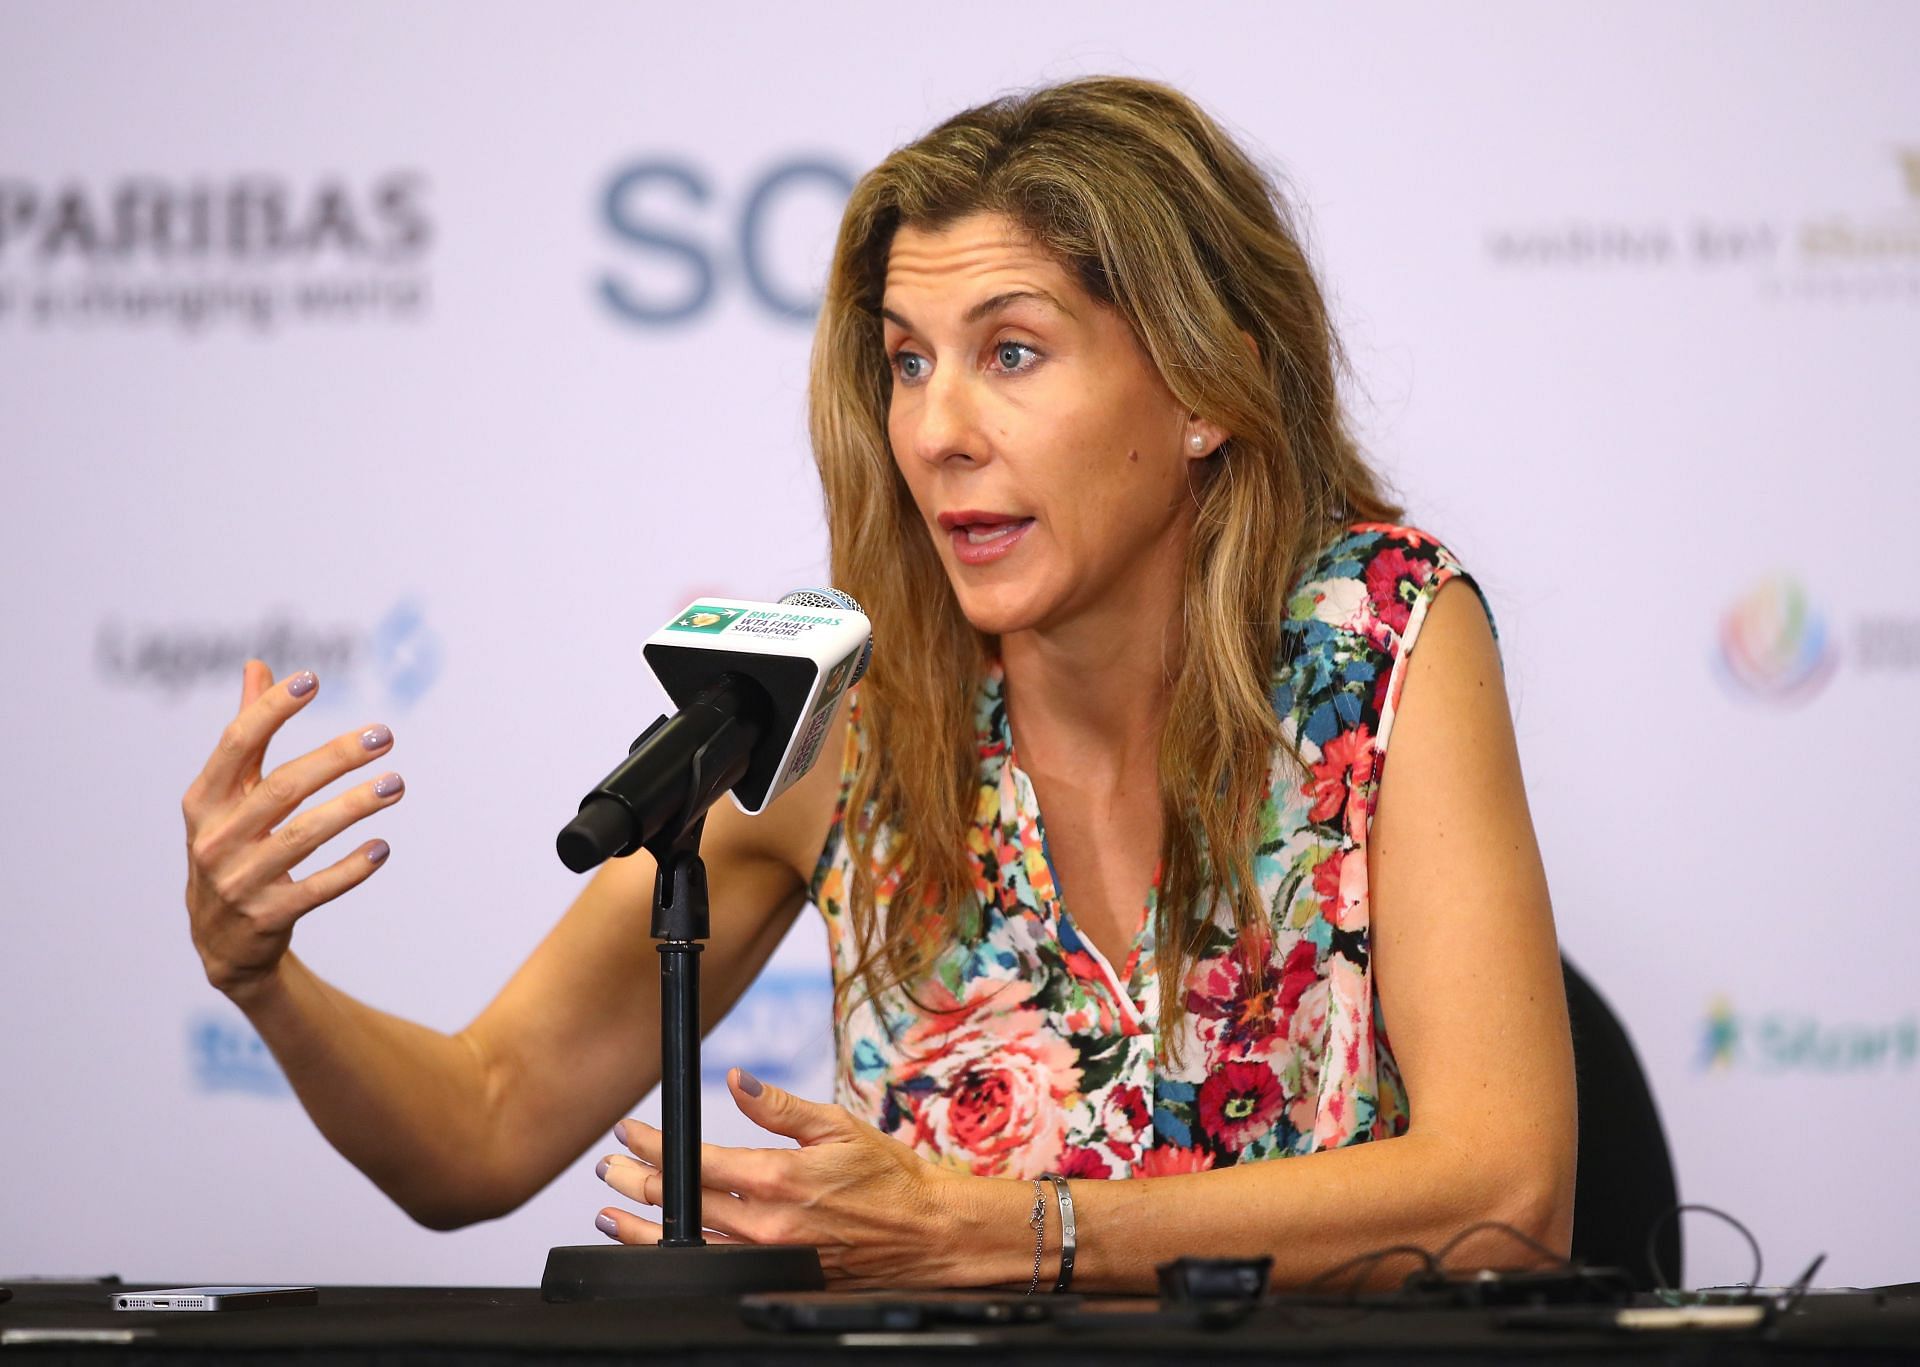 Monica Seles released a statement in 1993